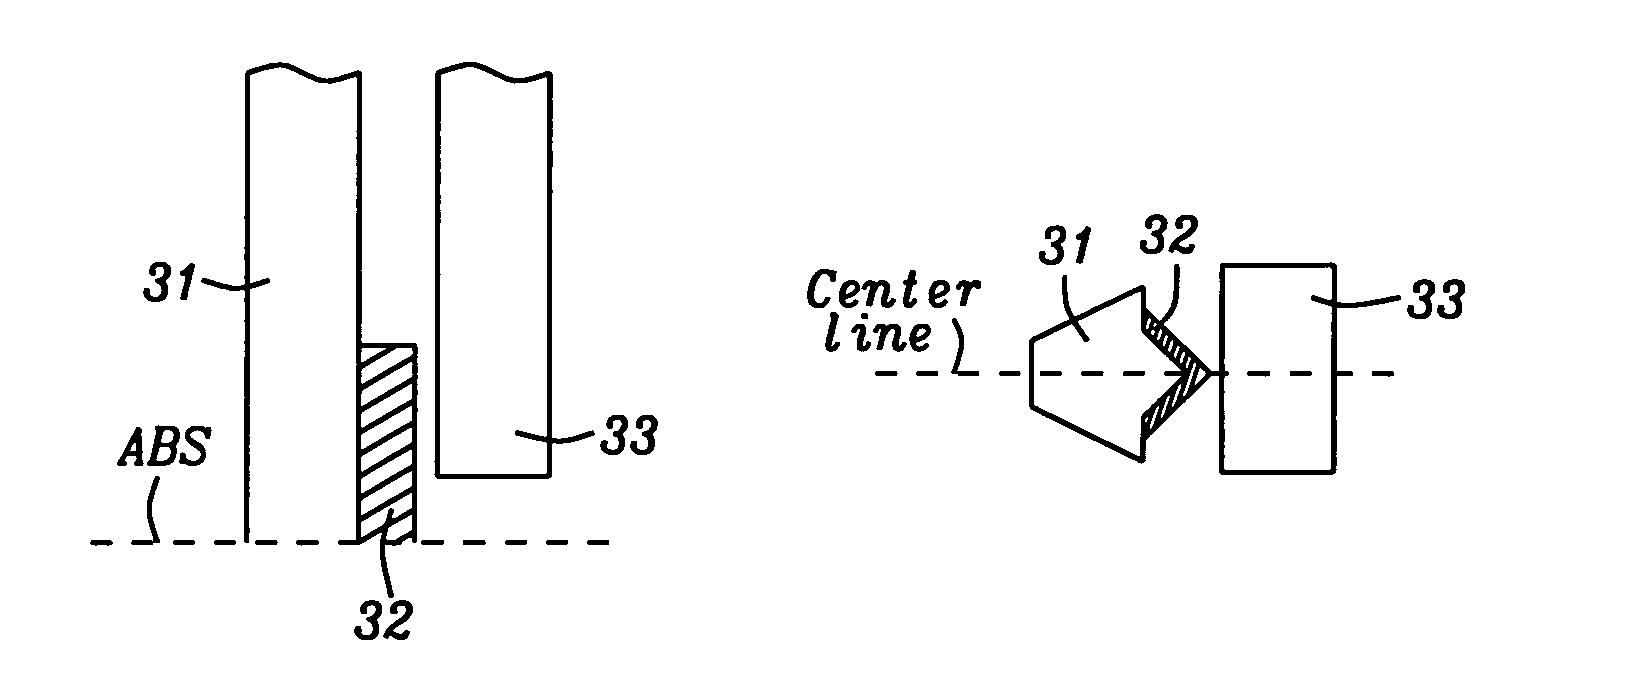 Magnetic core plasmon antenna with improved coupling efficiency